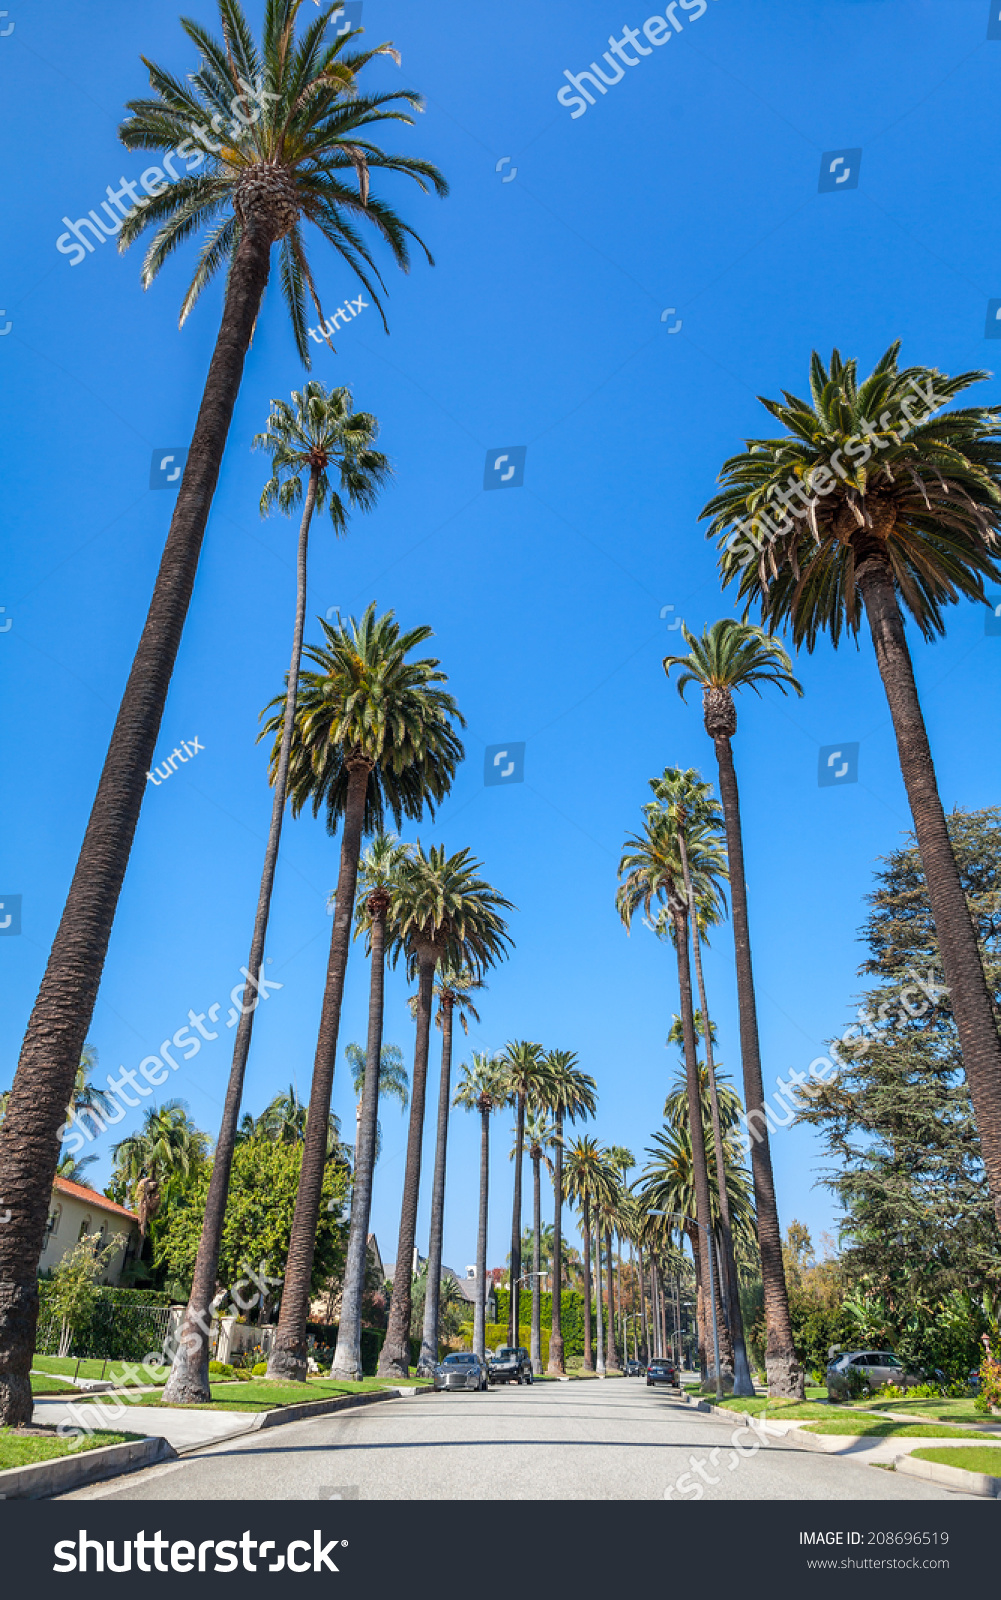 Palm Trees Street Beverly Hills Los Stock Photo 208696519 - Shutterstock